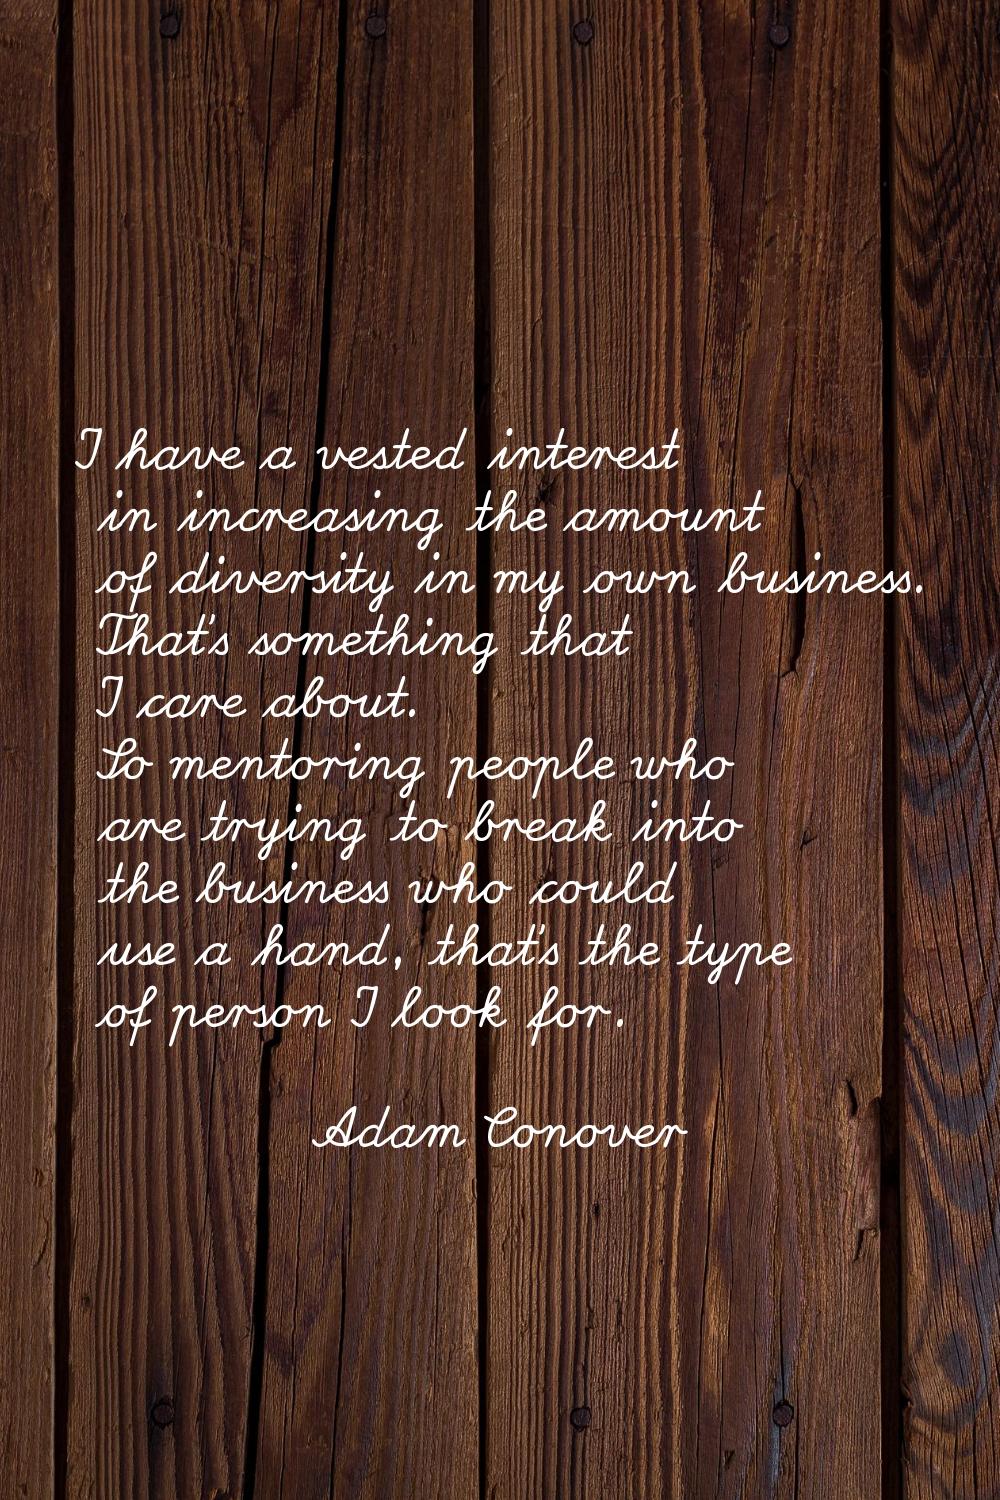 I have a vested interest in increasing the amount of diversity in my own business. That's something